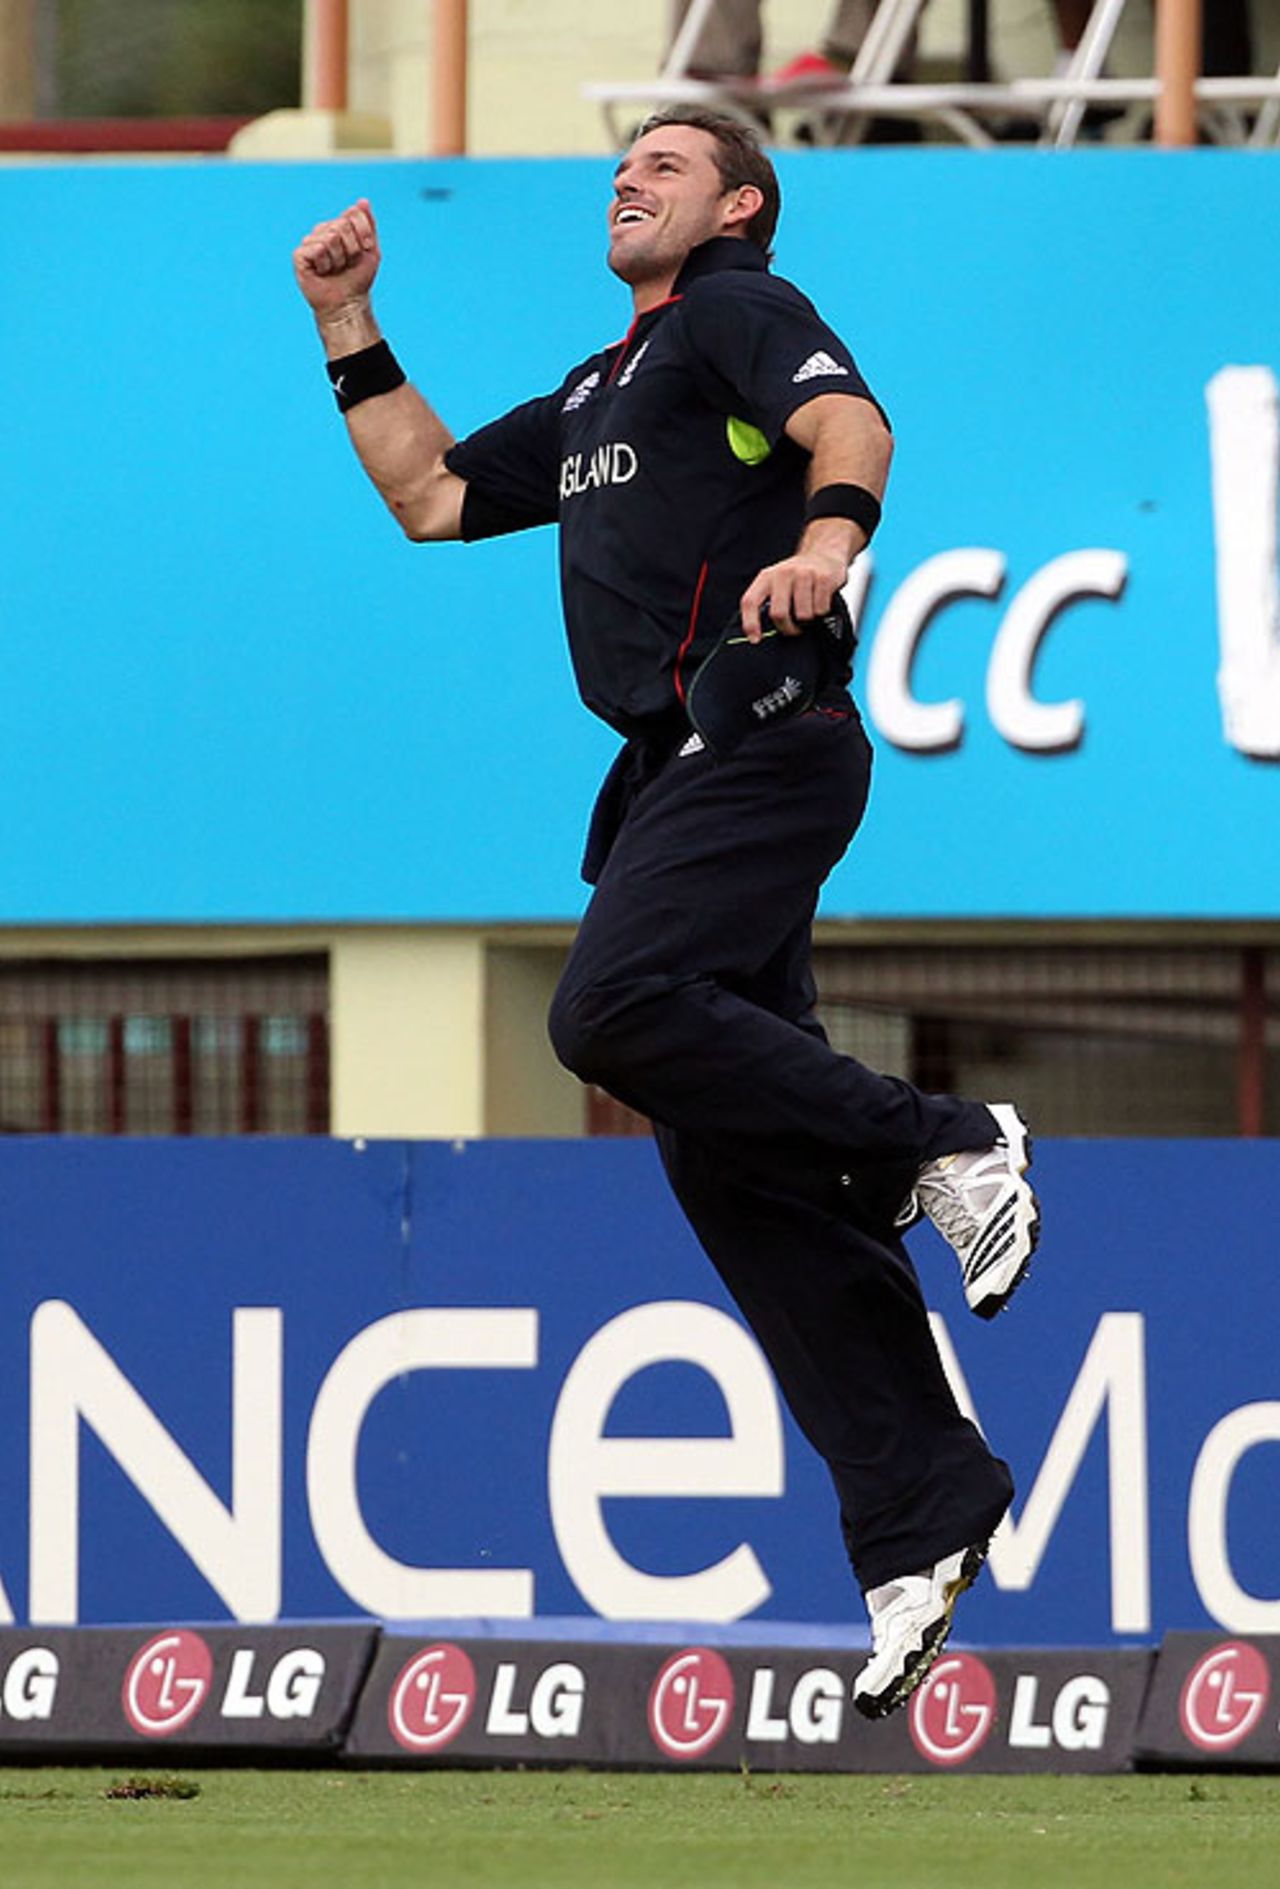 Michael Lumb intercepted a firm pull from Paul Stirling to give England their first wicket, England v Ireland, World Twenty20, Guyana, May 4, 2010